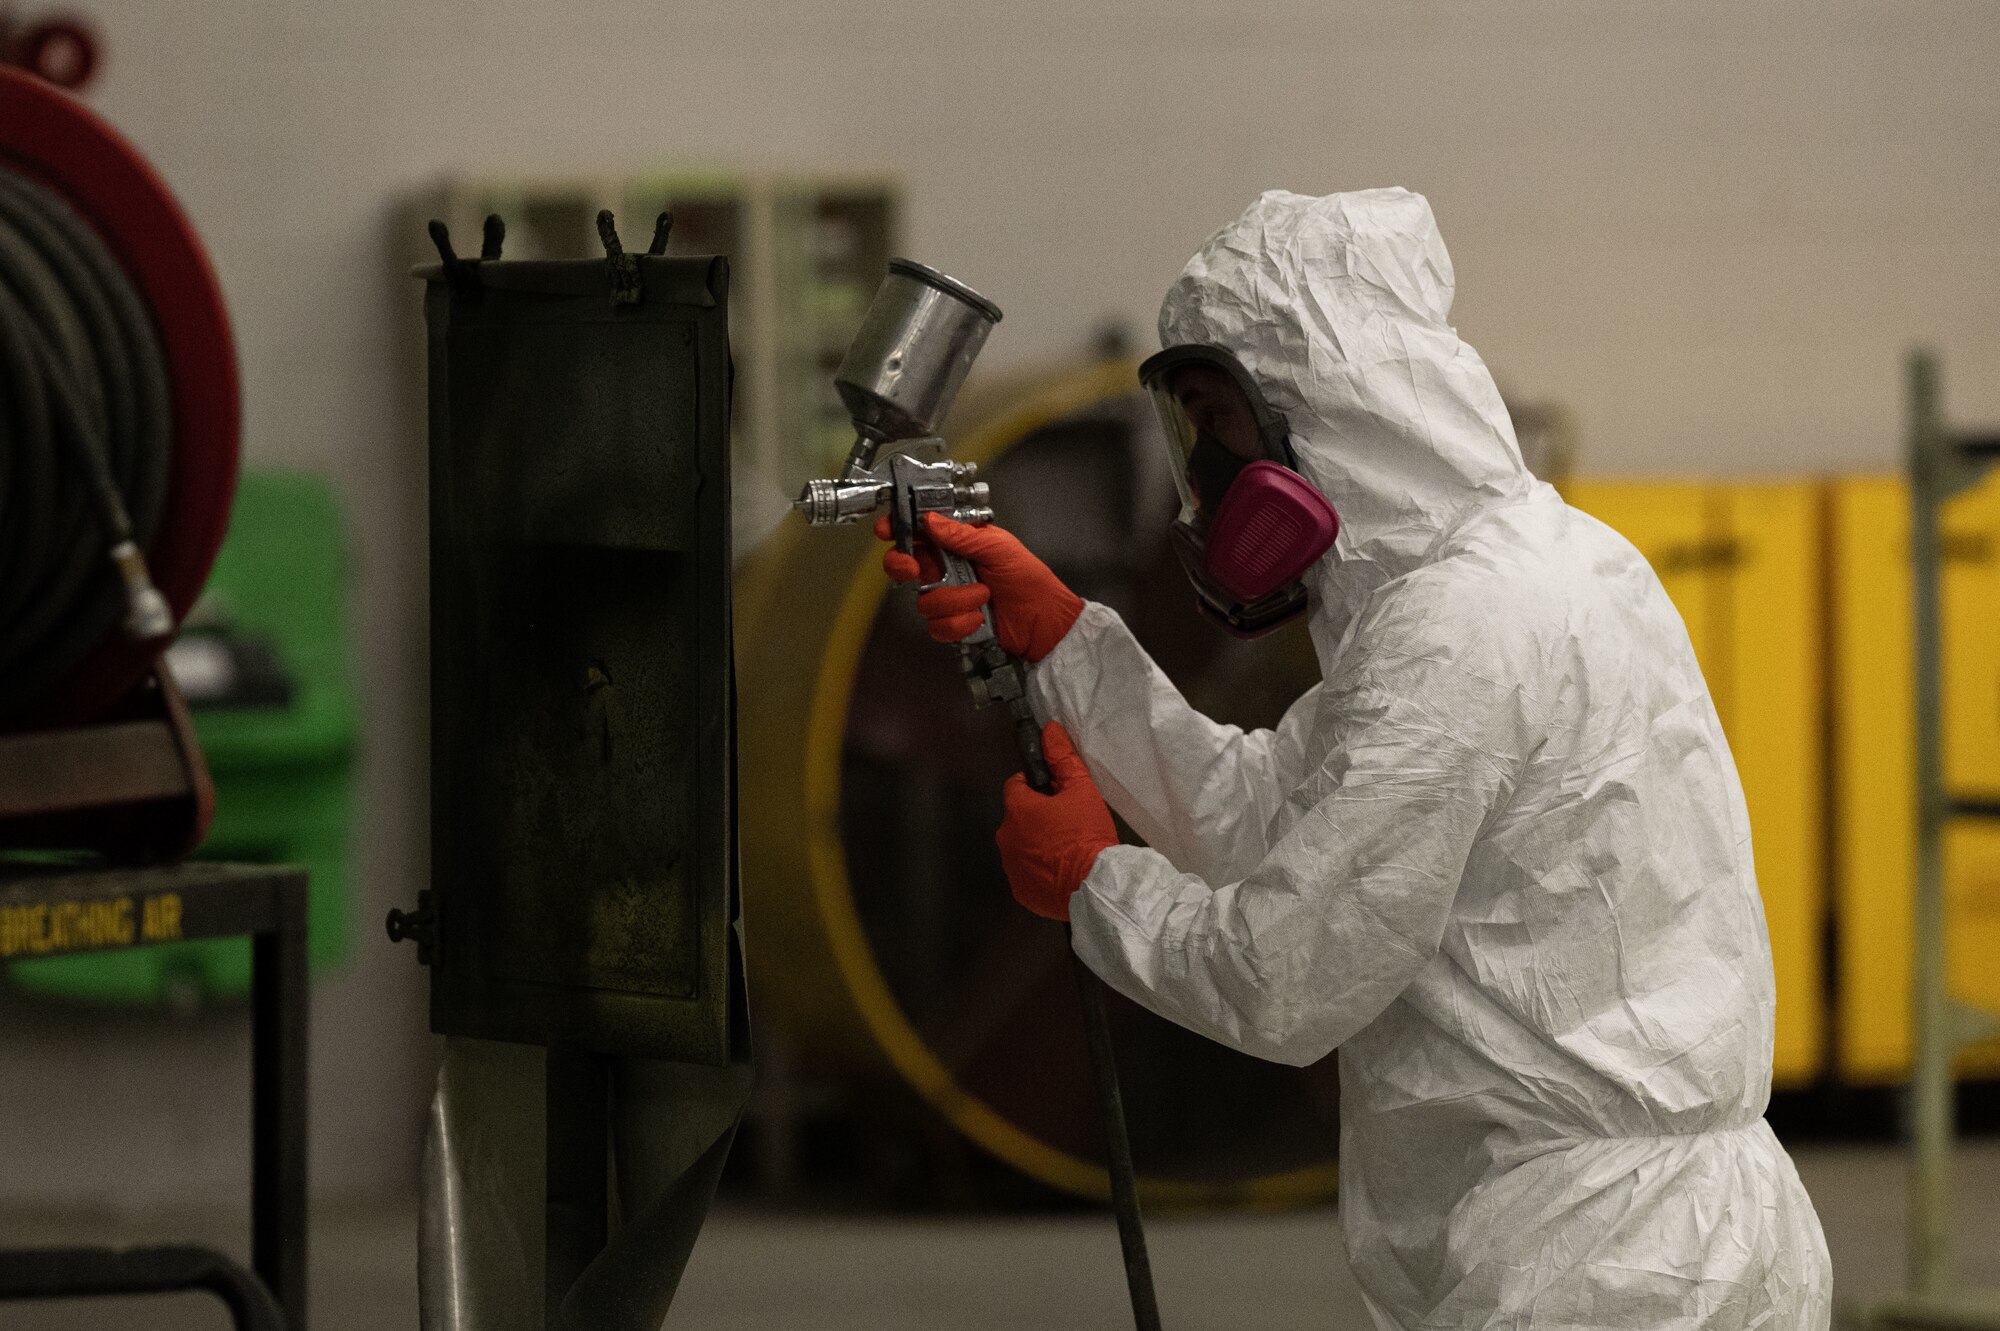 U.S. Air Force Staff Sgt. Dorian Whippie, a 1st Special Operations Maintenance Squadron aircraft structural maintenance craftsman, tests a paint gun for proper function in the corrosive control shop at Hurlburt Field, Florida, Feb. 16, 2022.